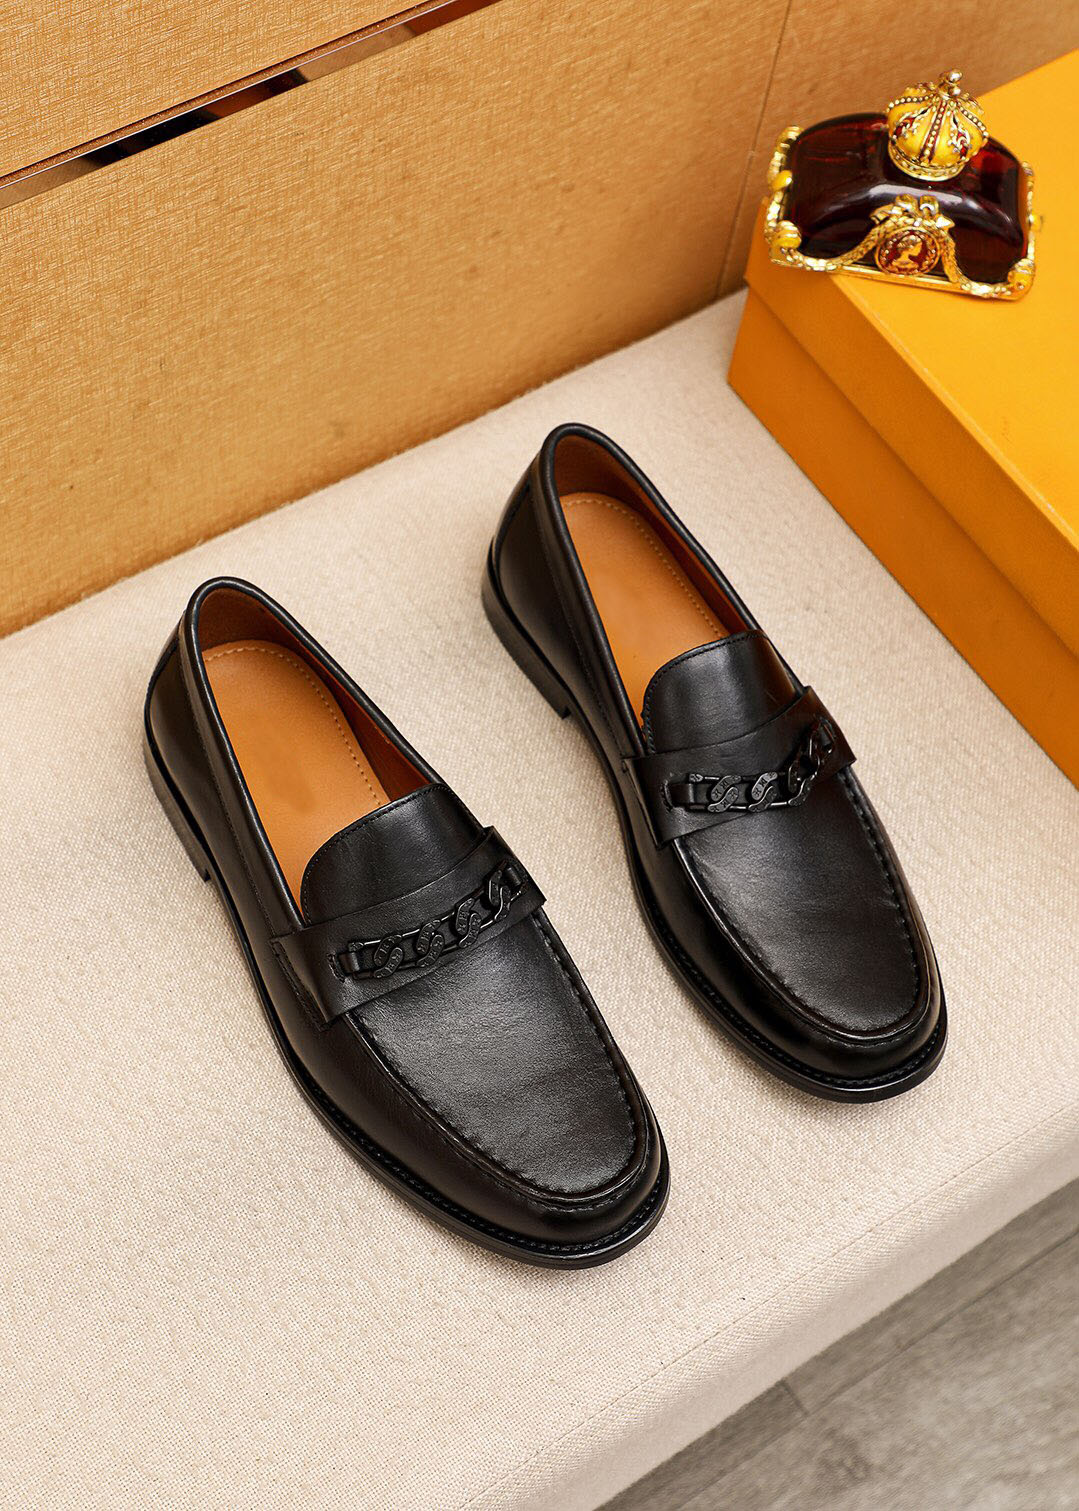 2023 Mens Dress Shoes Moccasins Flat Shoes Male Brand Designer Fashion Classic Casual Breathable Loafers Size 38-45